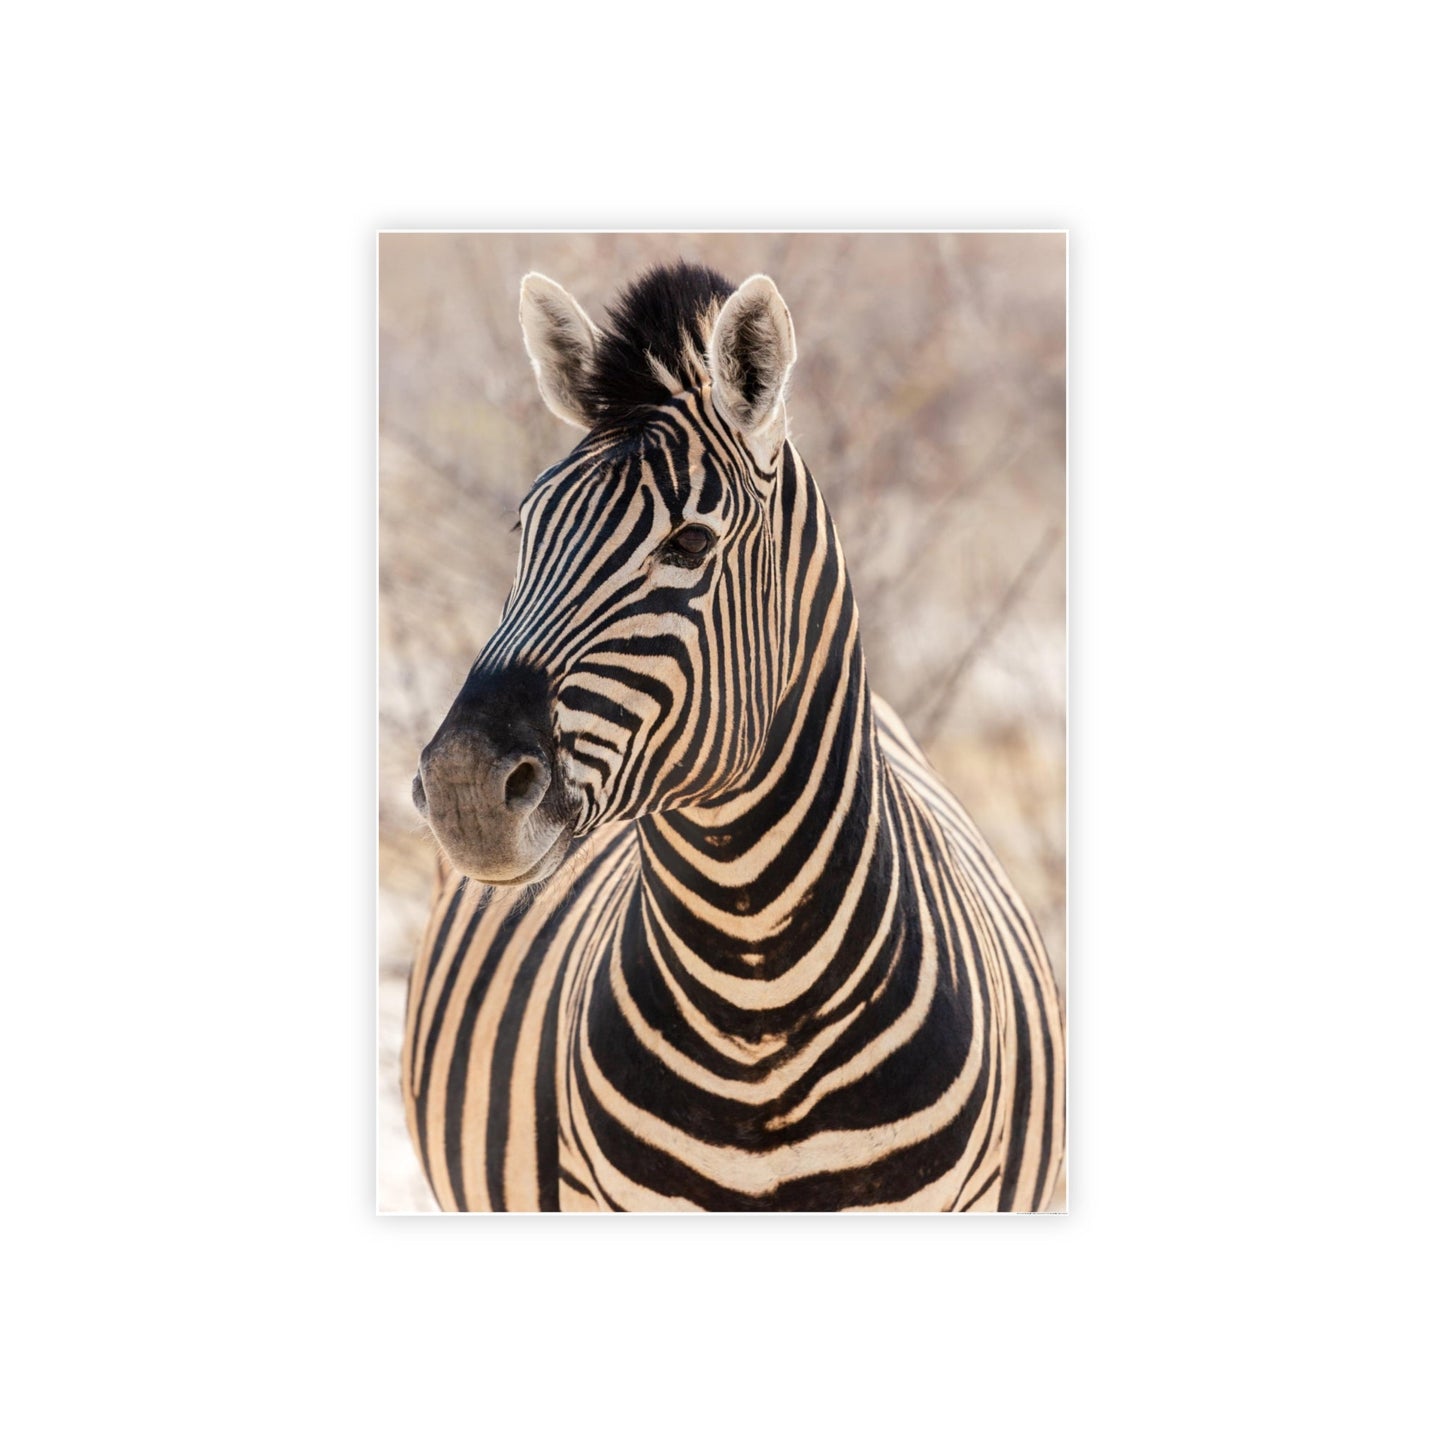 Zebras in the Wild: Stunning Print on Framed Canvas